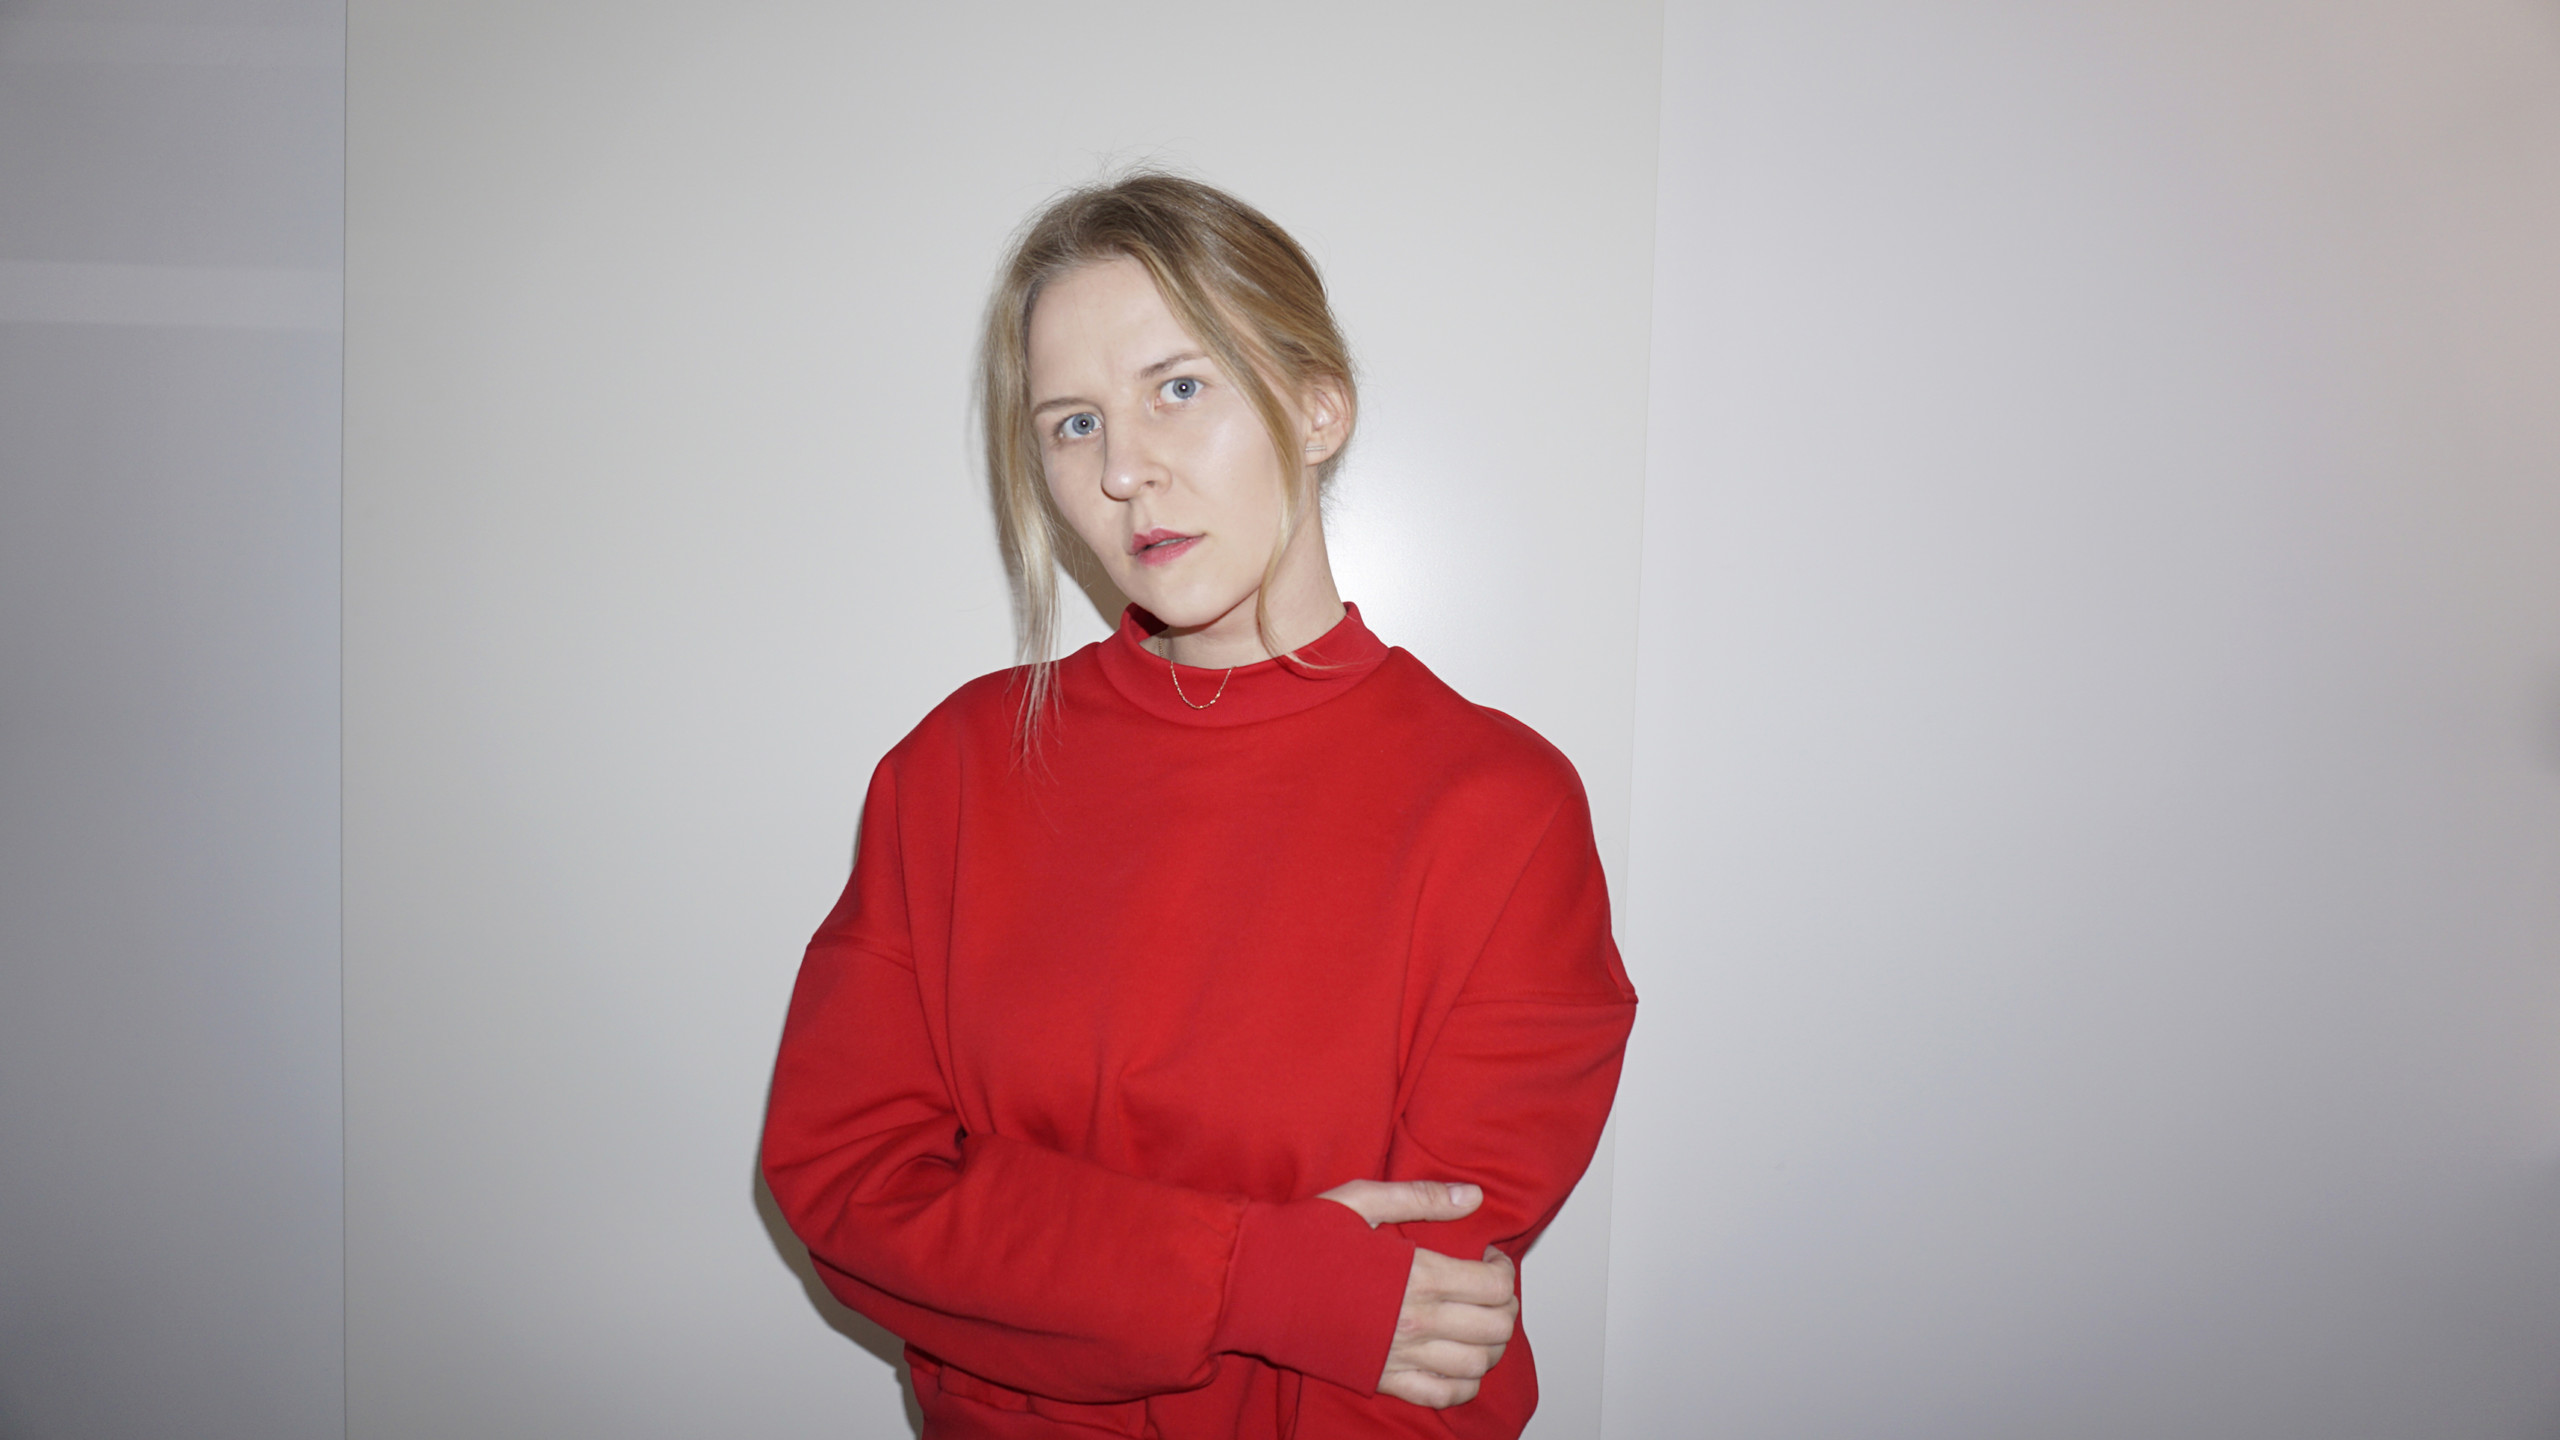 Lilian Hiob, a white-skinned person with blonde hair and red lipstick. Framed from waist up, Lilian is wearing a bright red sweater. Lilian has crossed her hands and is standing in front of a white backdrop.